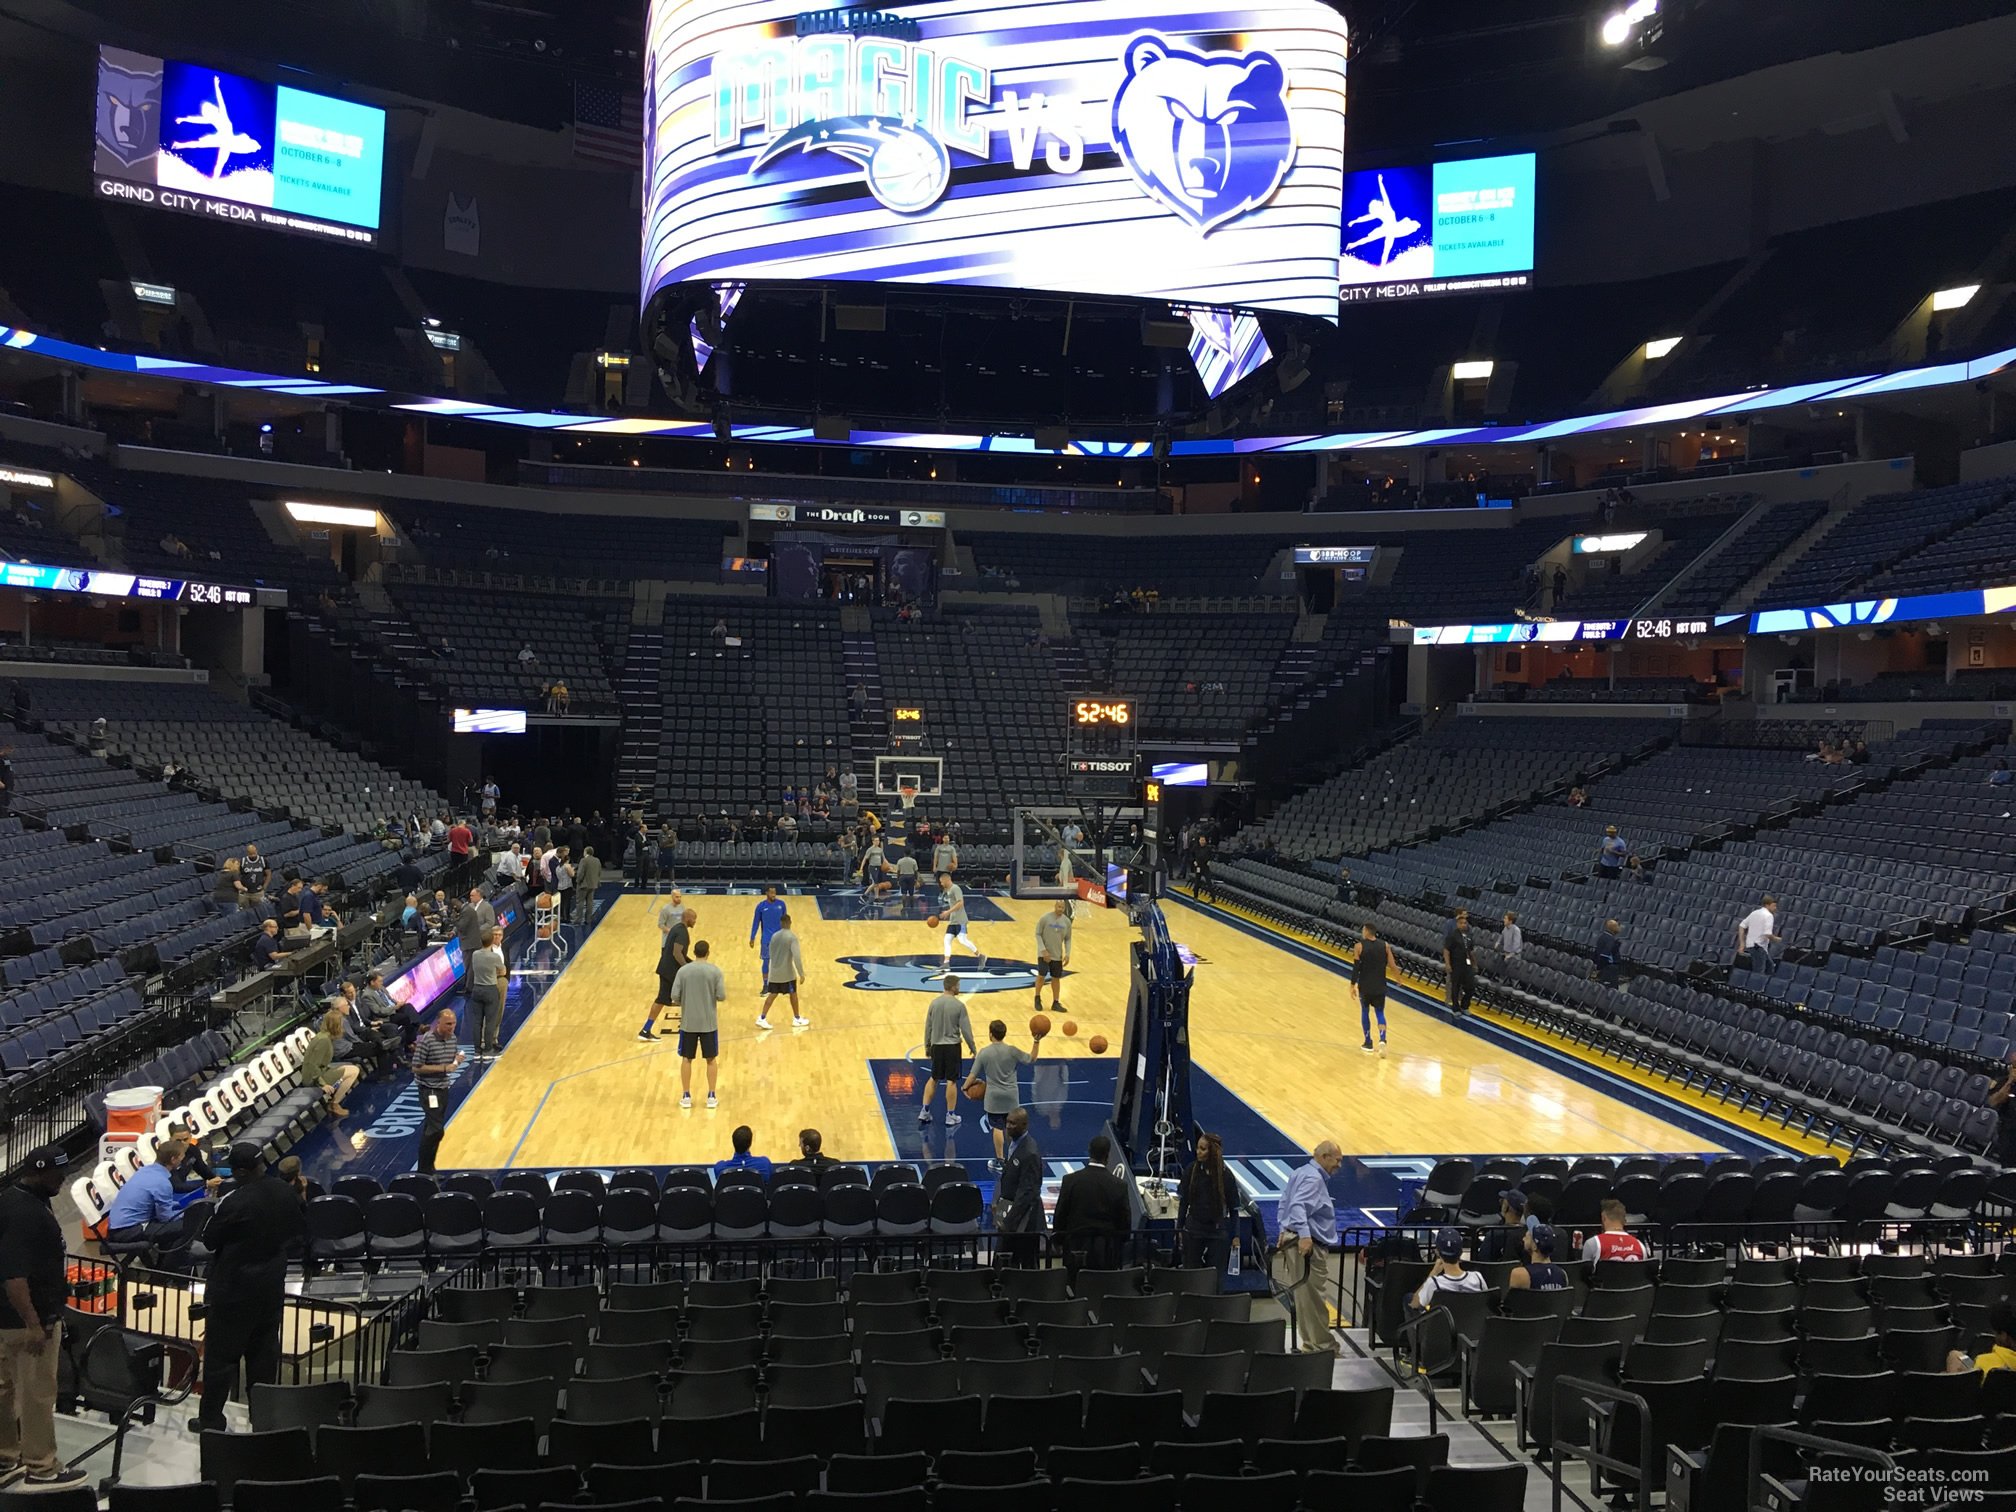 section 109, row r seat view  for basketball - fedex forum